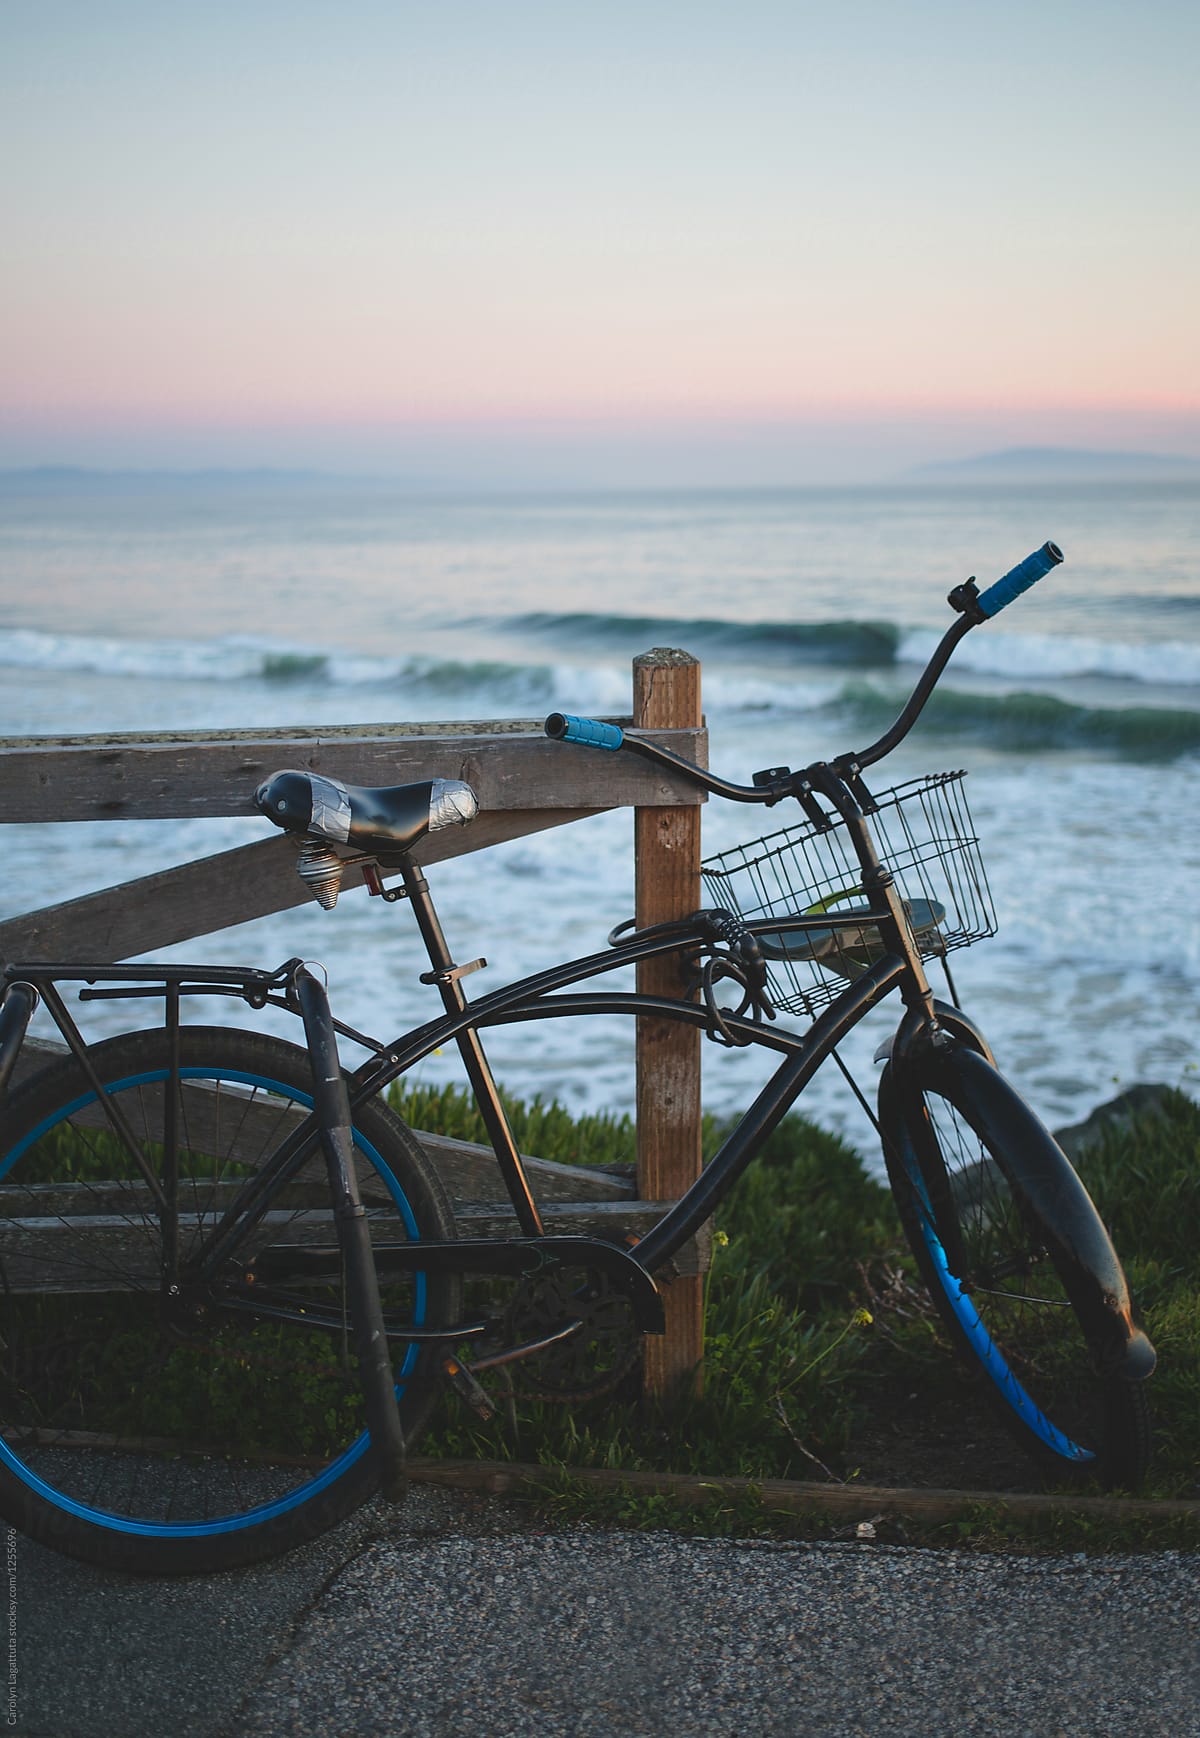 Cruiser bike parked by the ocean